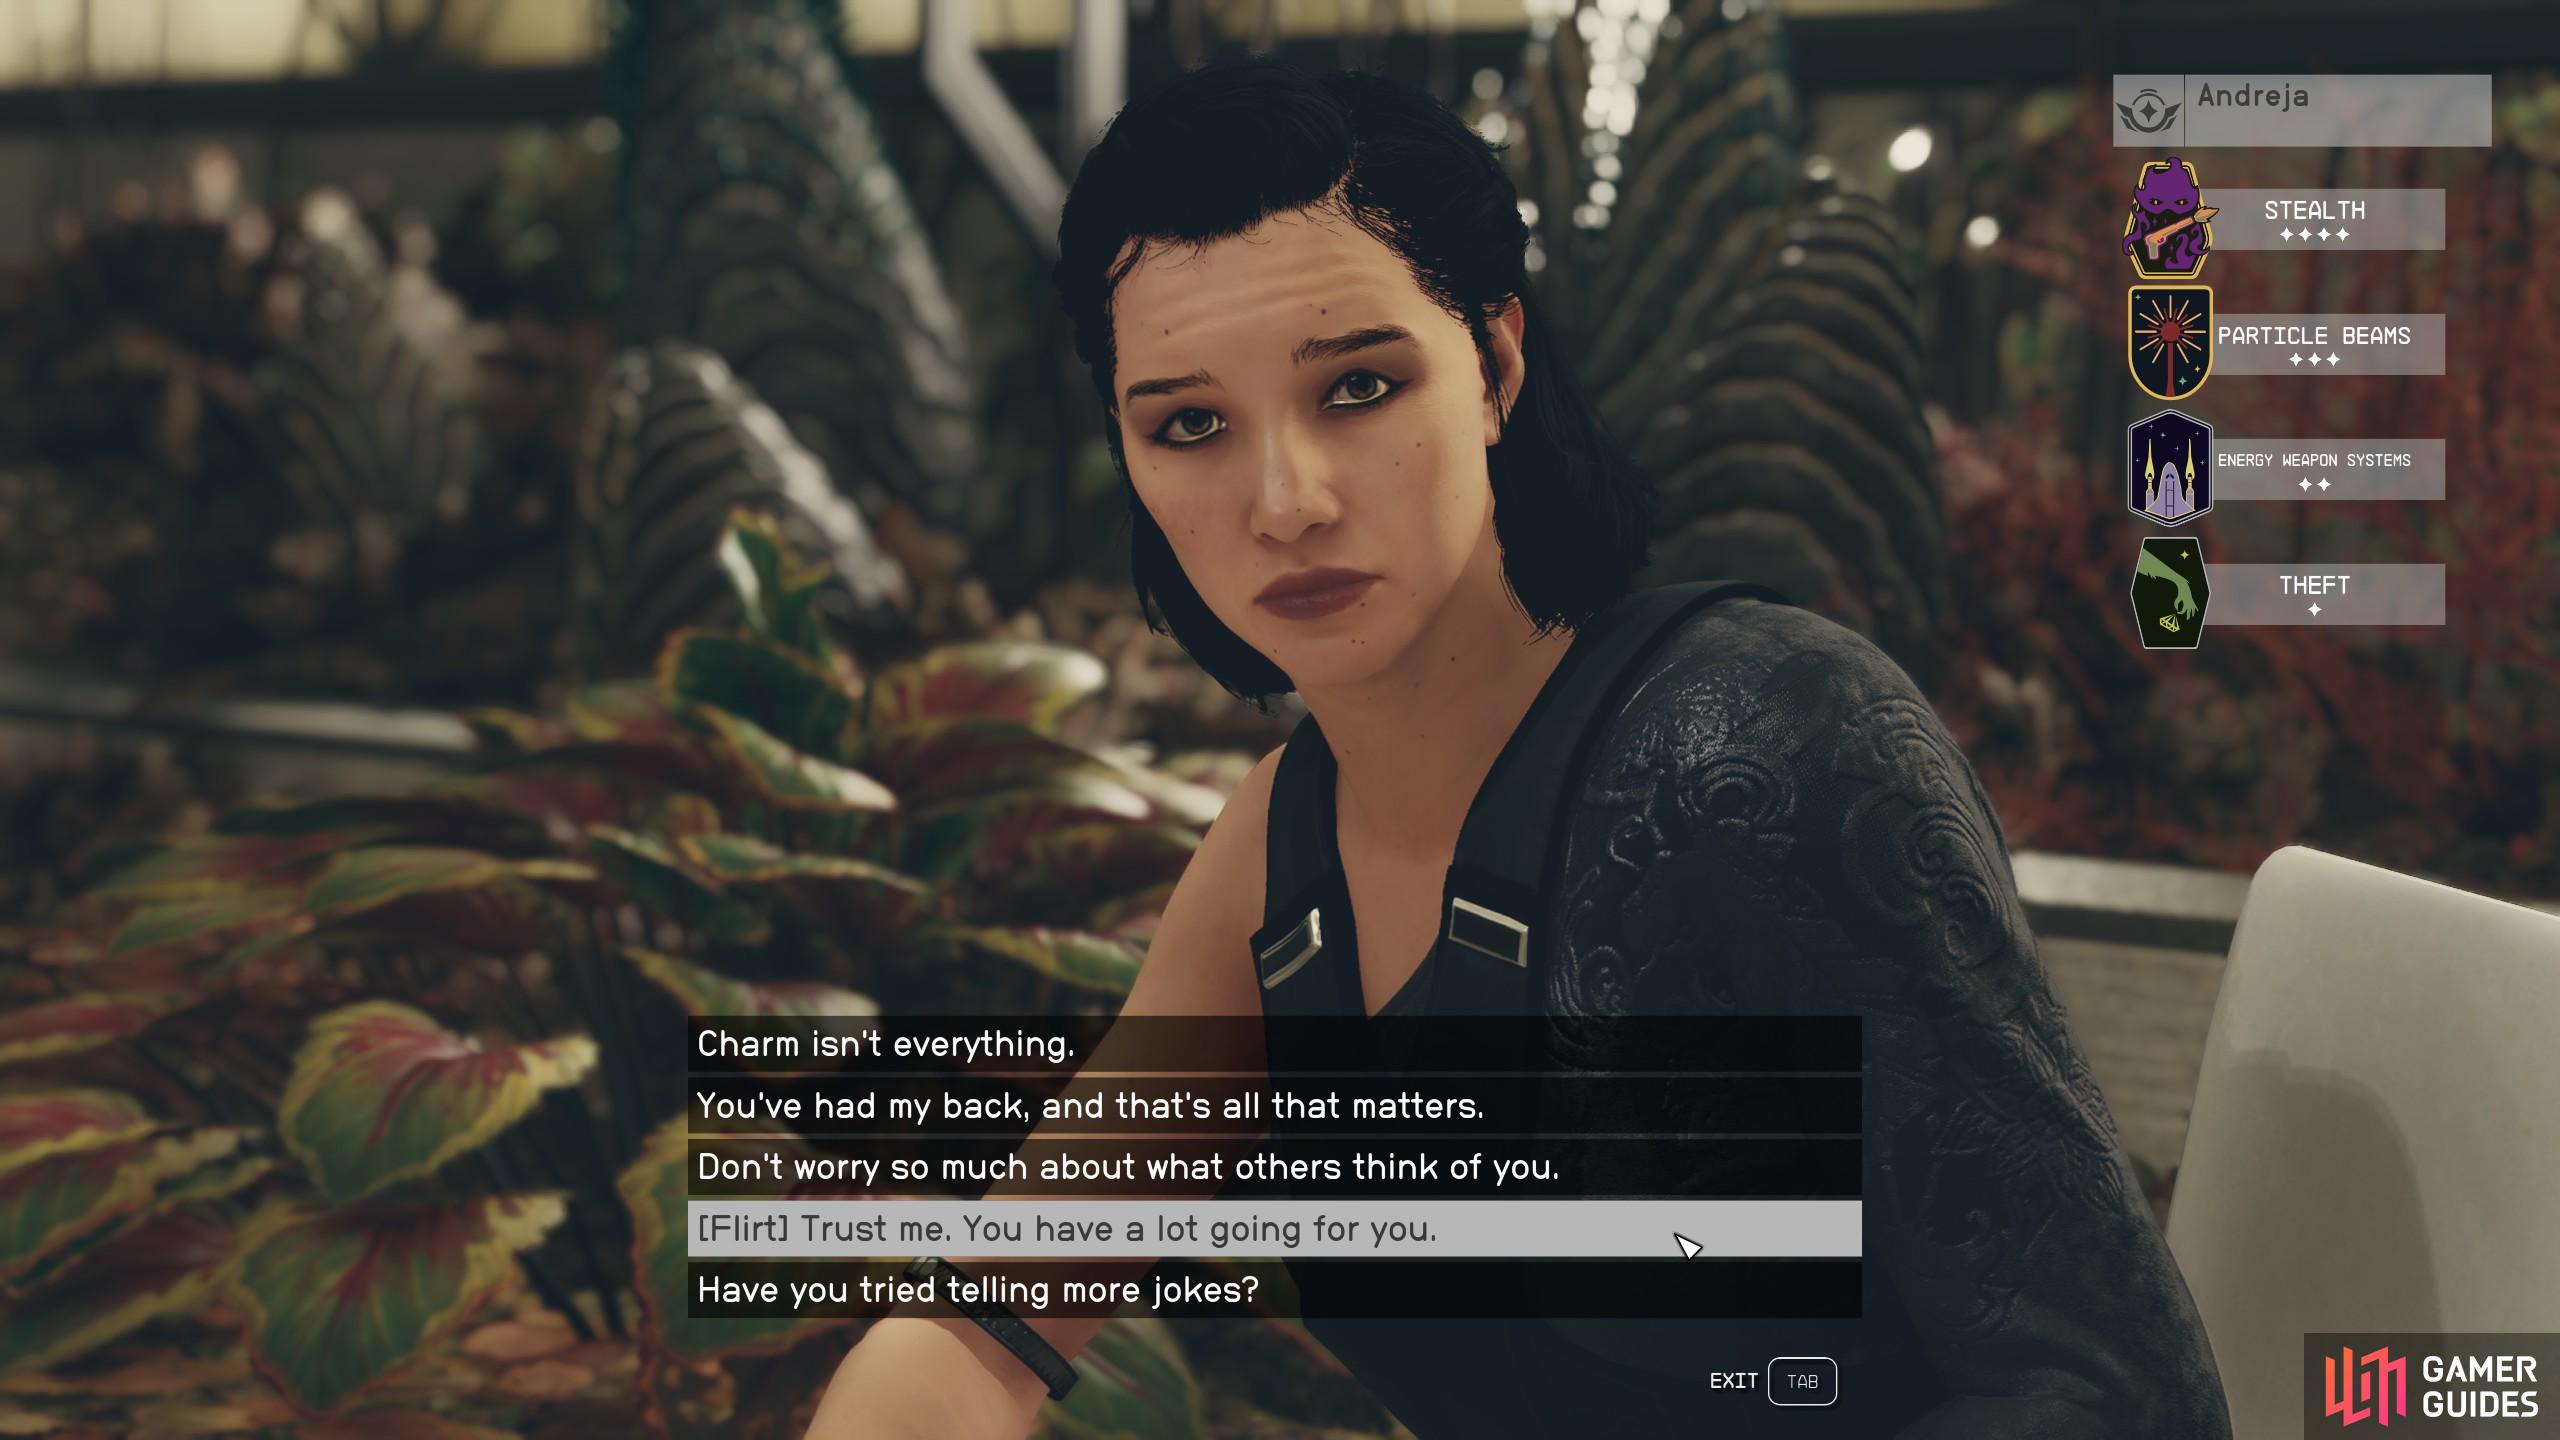 You can get decent Flirt options after the High Price to Pay Main Story Mission, and after some other Constellation background conversations with her.